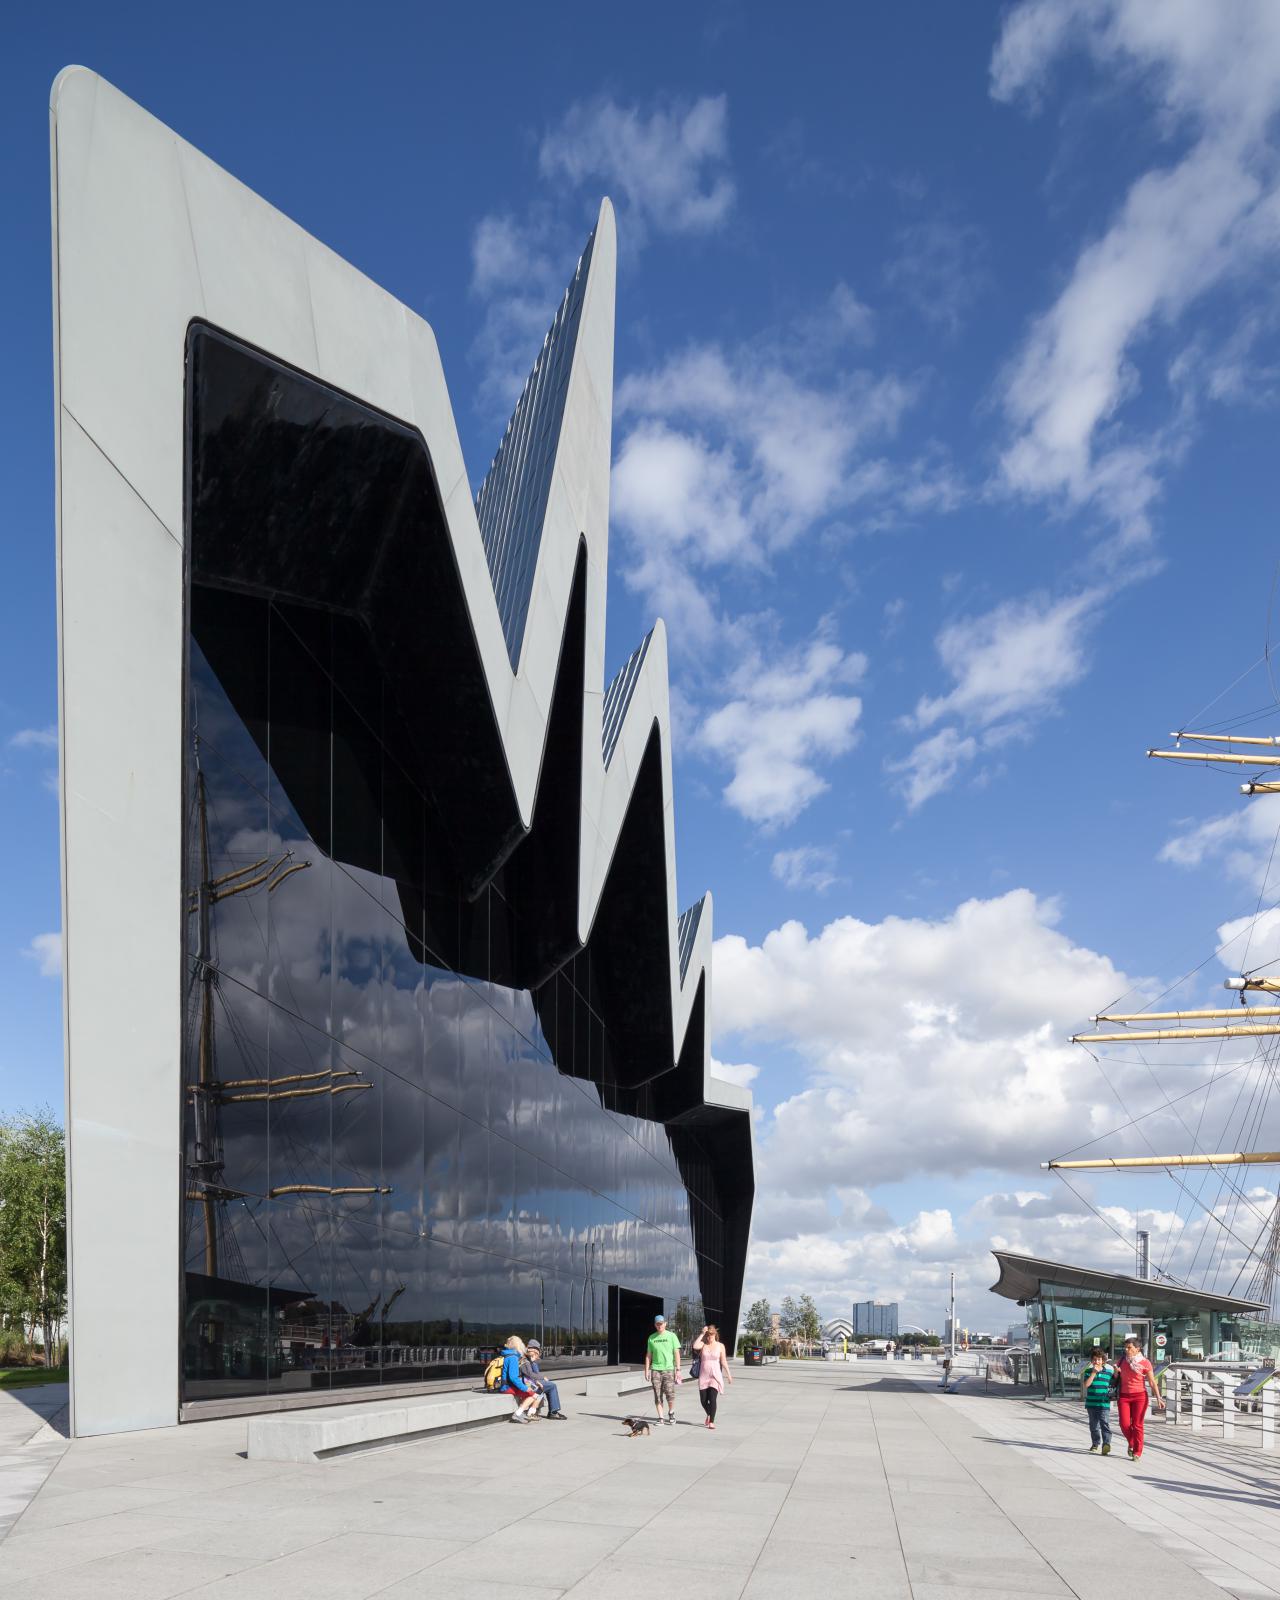 Photograph of Riverside Museum of Transport, designed by Zaha Hadid Architects and located in Glasgow, United Kingdom